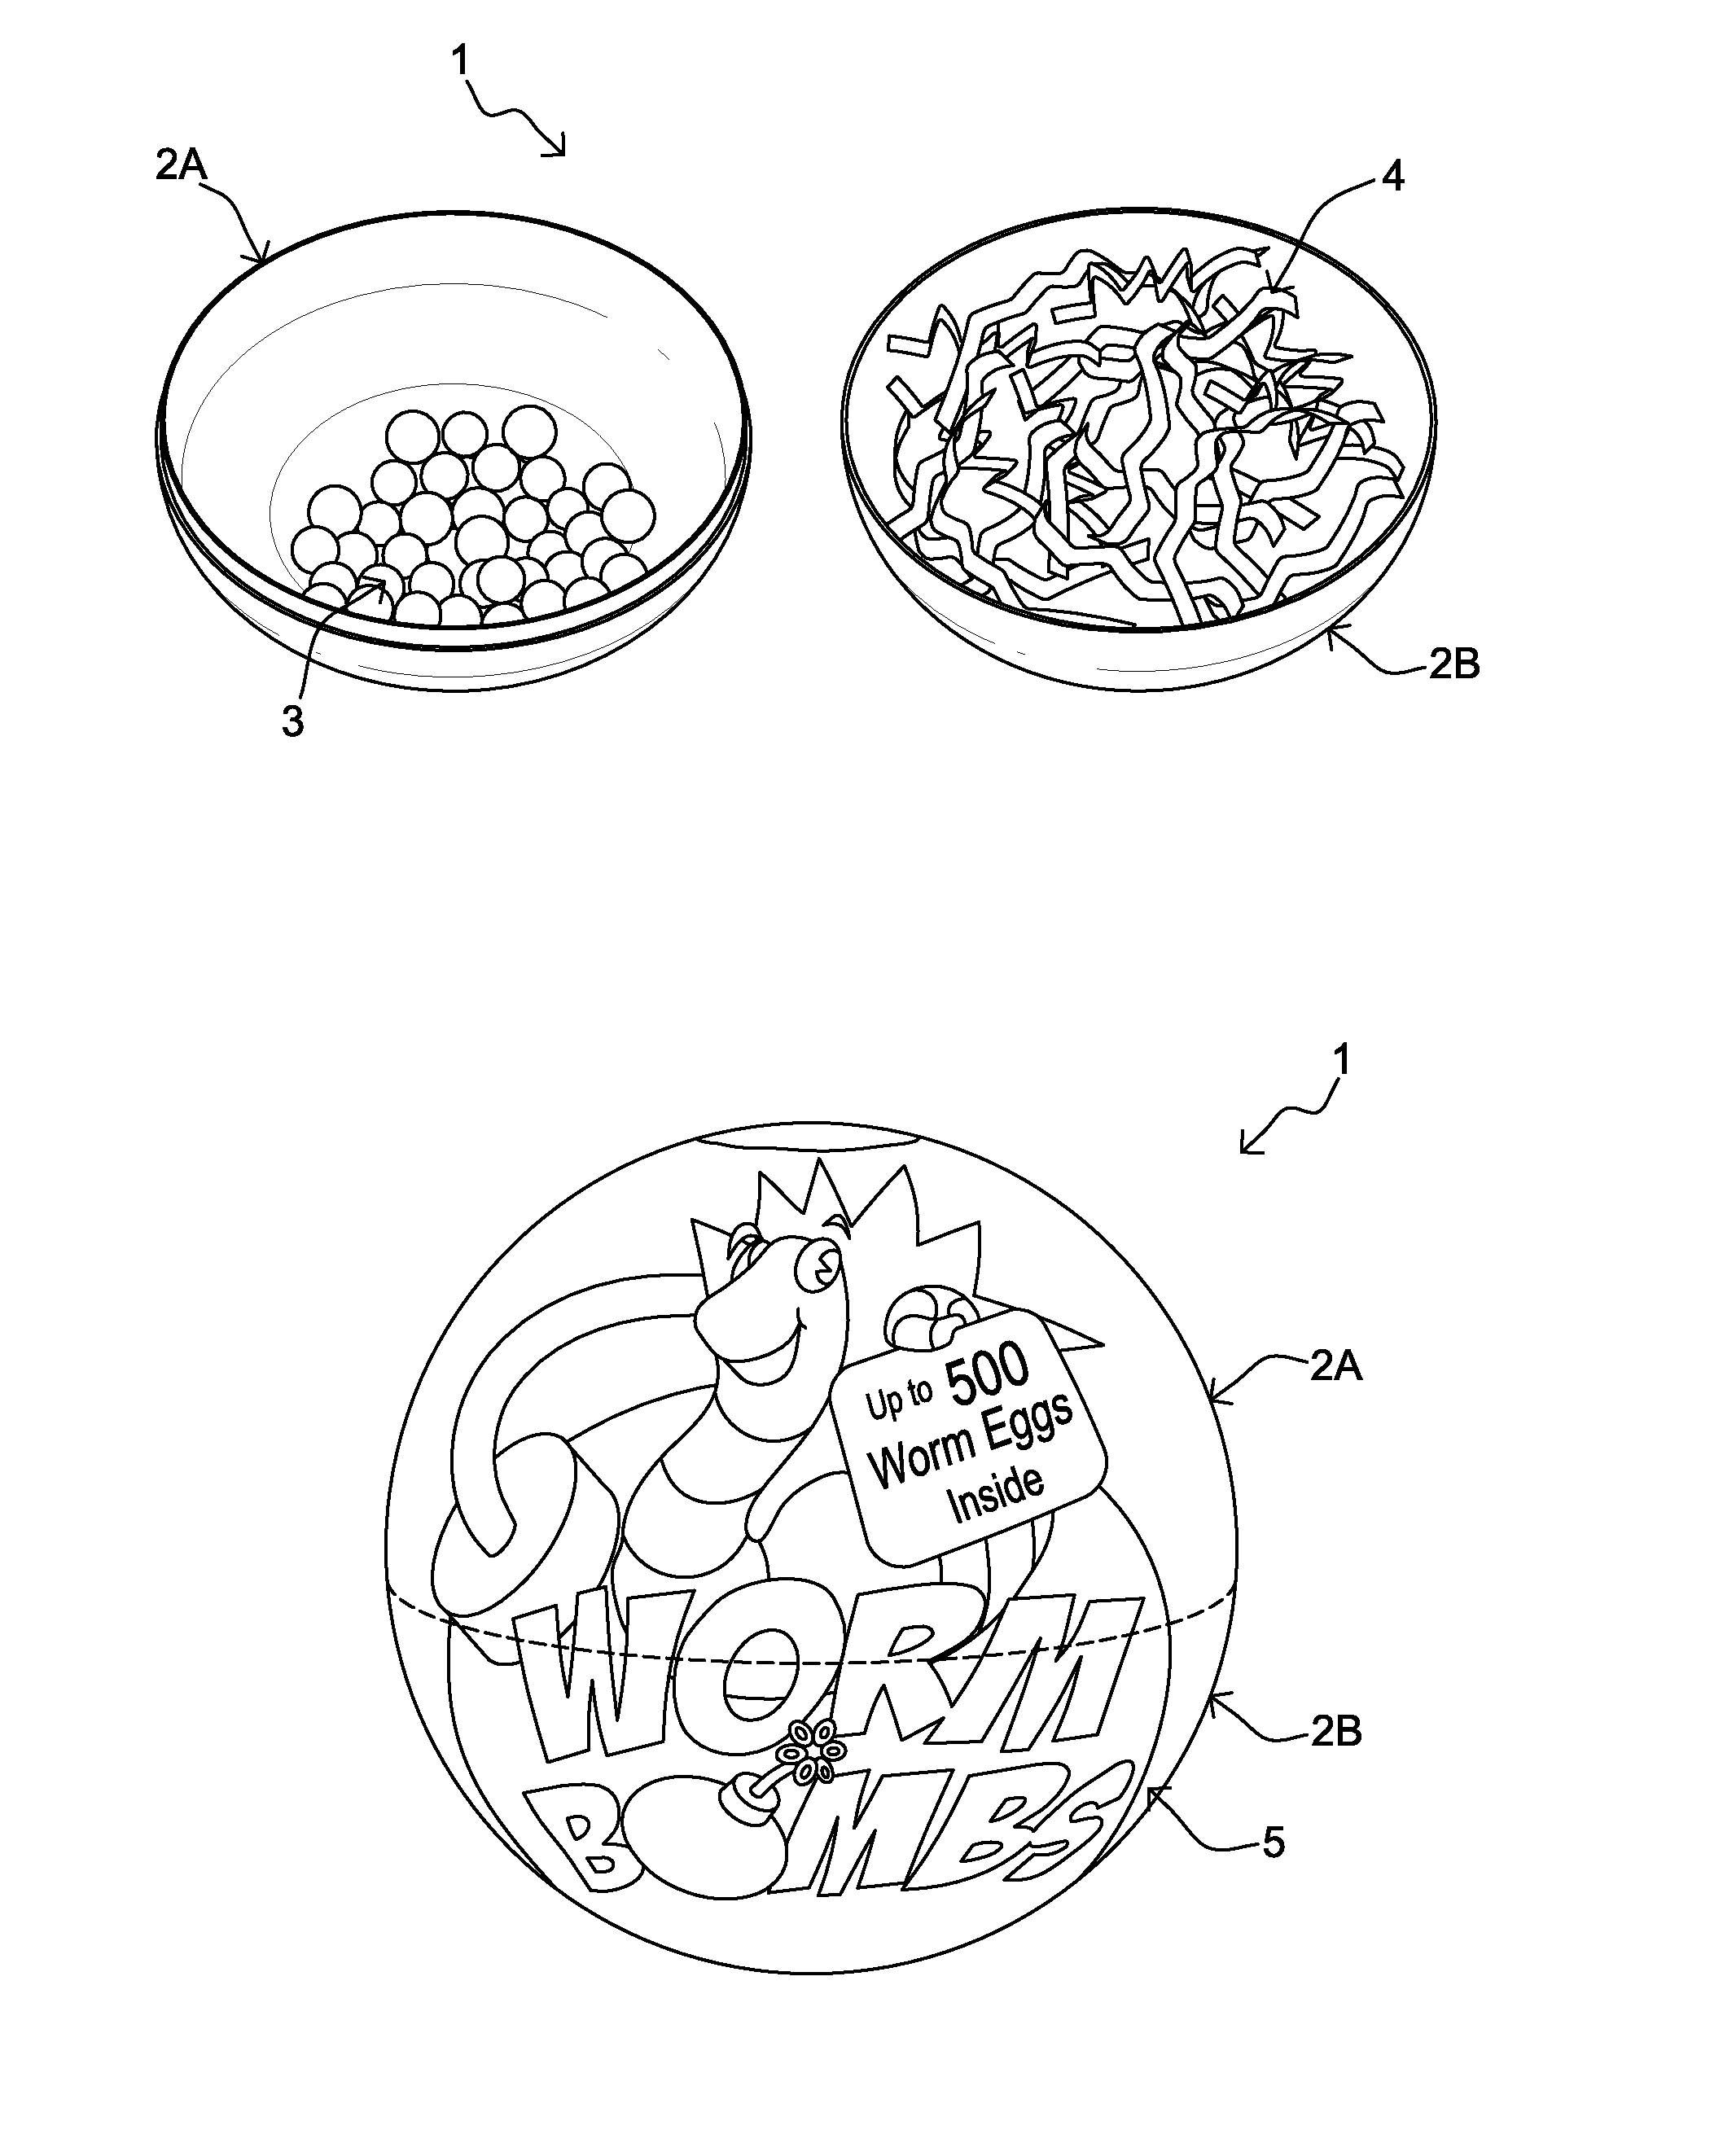 Biodegradable worm-egg-delivery system for soil enhancement and methods of use